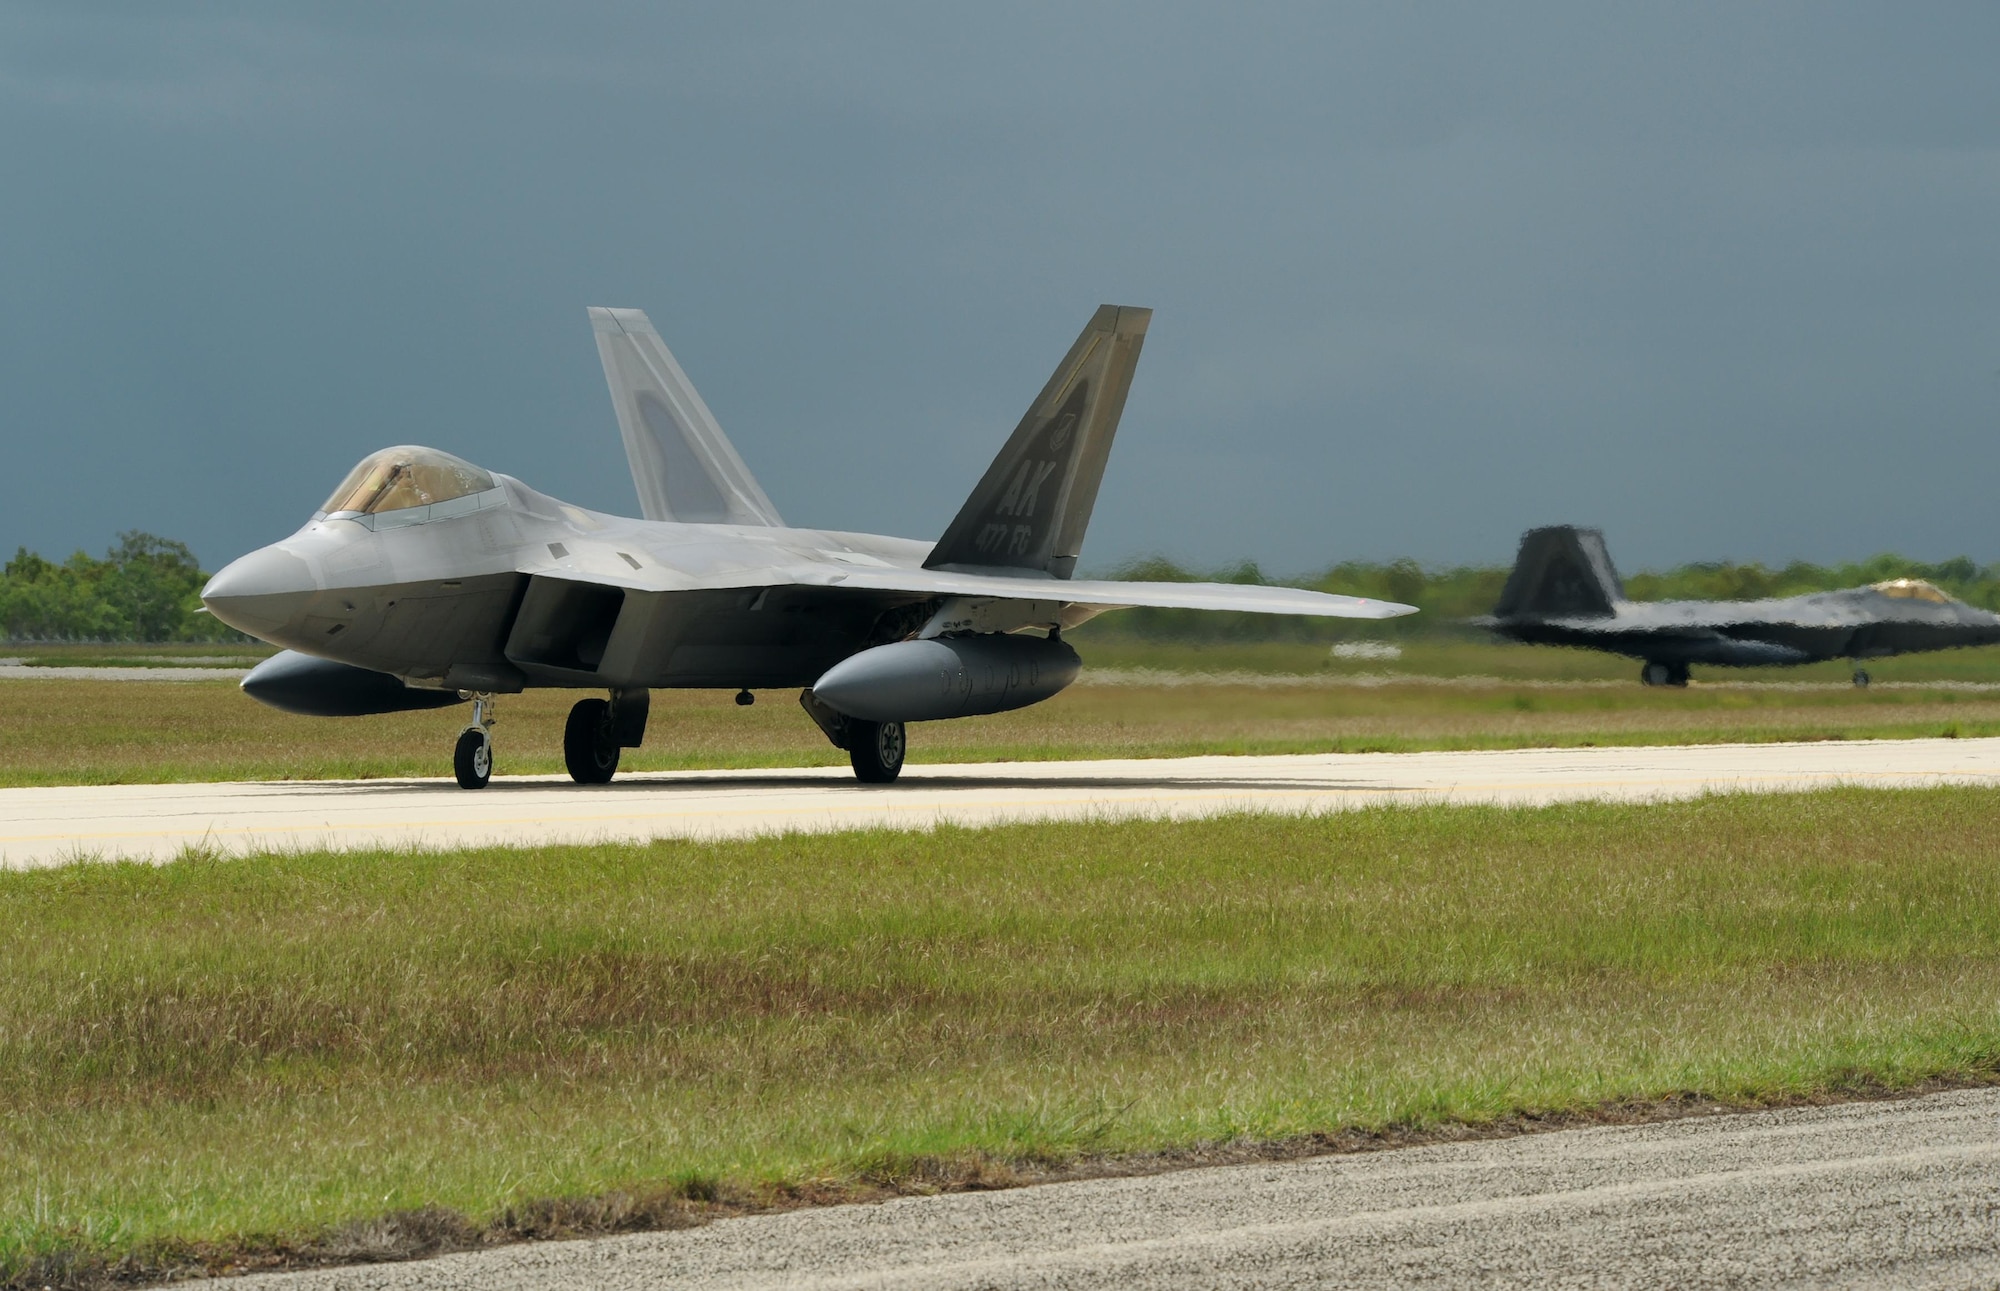 A U.S. Air Force F-22 Raptor assigned to the 90th Fighter Squadron, Joint Base Elmendorf-Richardson, Alaska, taxies on the runway at Royal Australian Air Force (RAAF) Base Tindal, Feb. 13, 2017. Twelve F-22 Raptors and approximately 200 Airmen are at RAAF Base Tindal as part of the Enhanced Air Cooperation (EAC) Initiative under the Force Posture Agreement between the U.S. and Australia. EAC creates the foundation for an enhanced rotational presence of U.S. military personnel in Australia to promote interoperability, build upon our already strong alliance, and reaffirm our commitment to the Indo-Asia-Pacific region. (U.S. Air Force photo/Staff Sgt. Alexander Martinez)